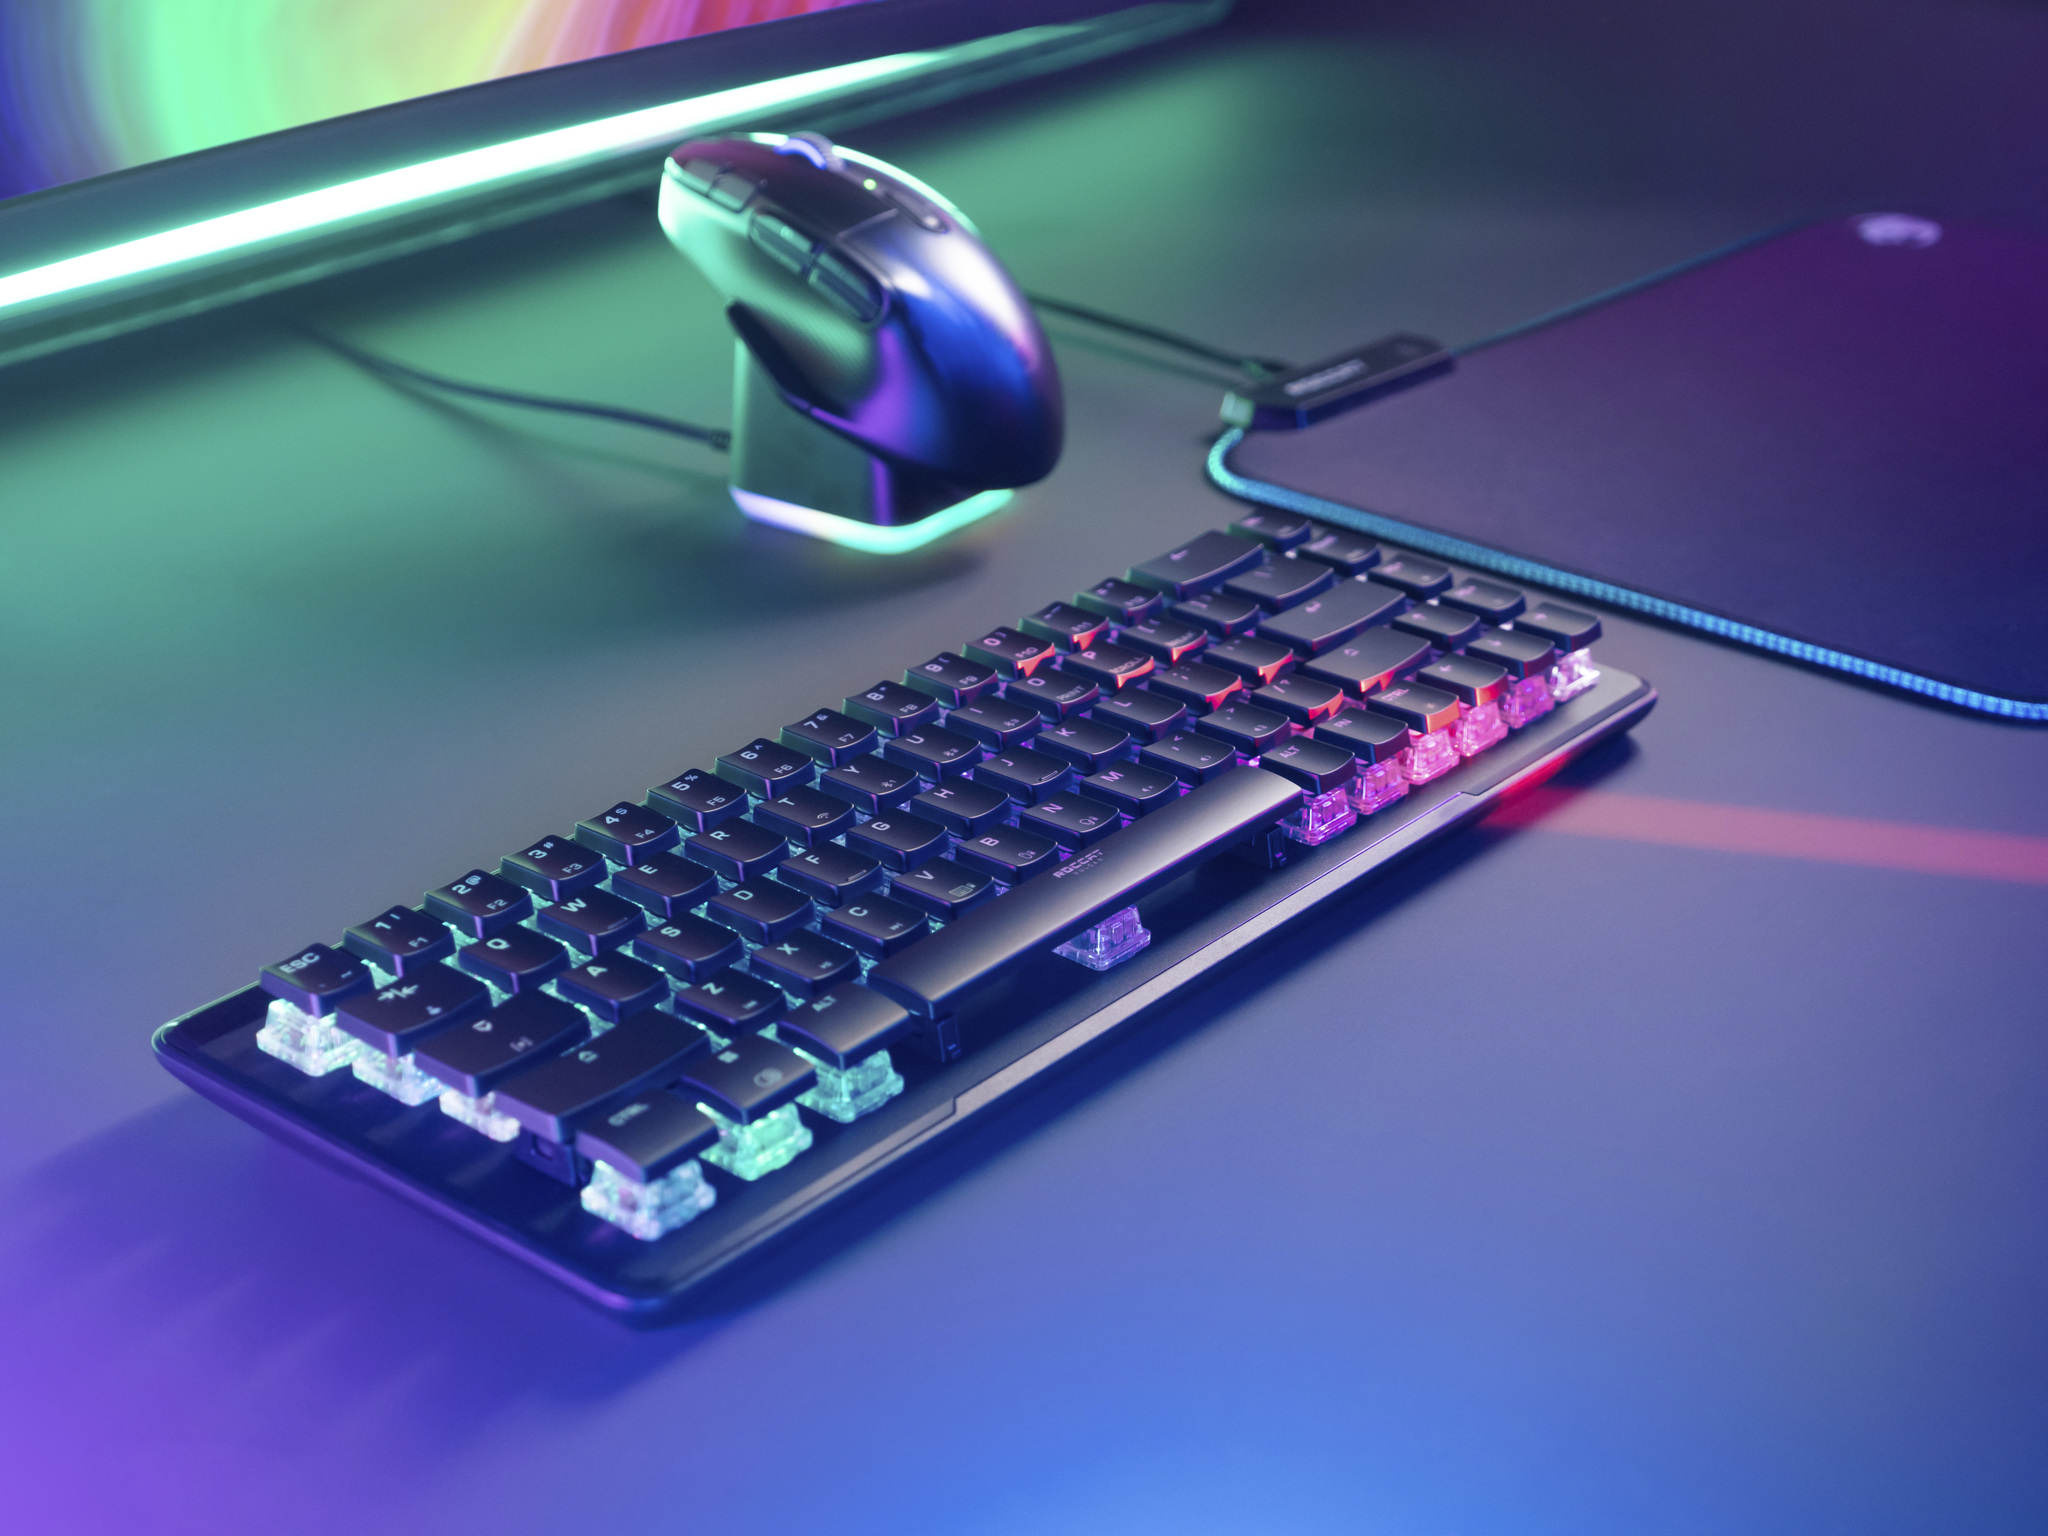 ROCCAT Vulcan II Mini Keyboard Review - Big Things Come in Small Packages